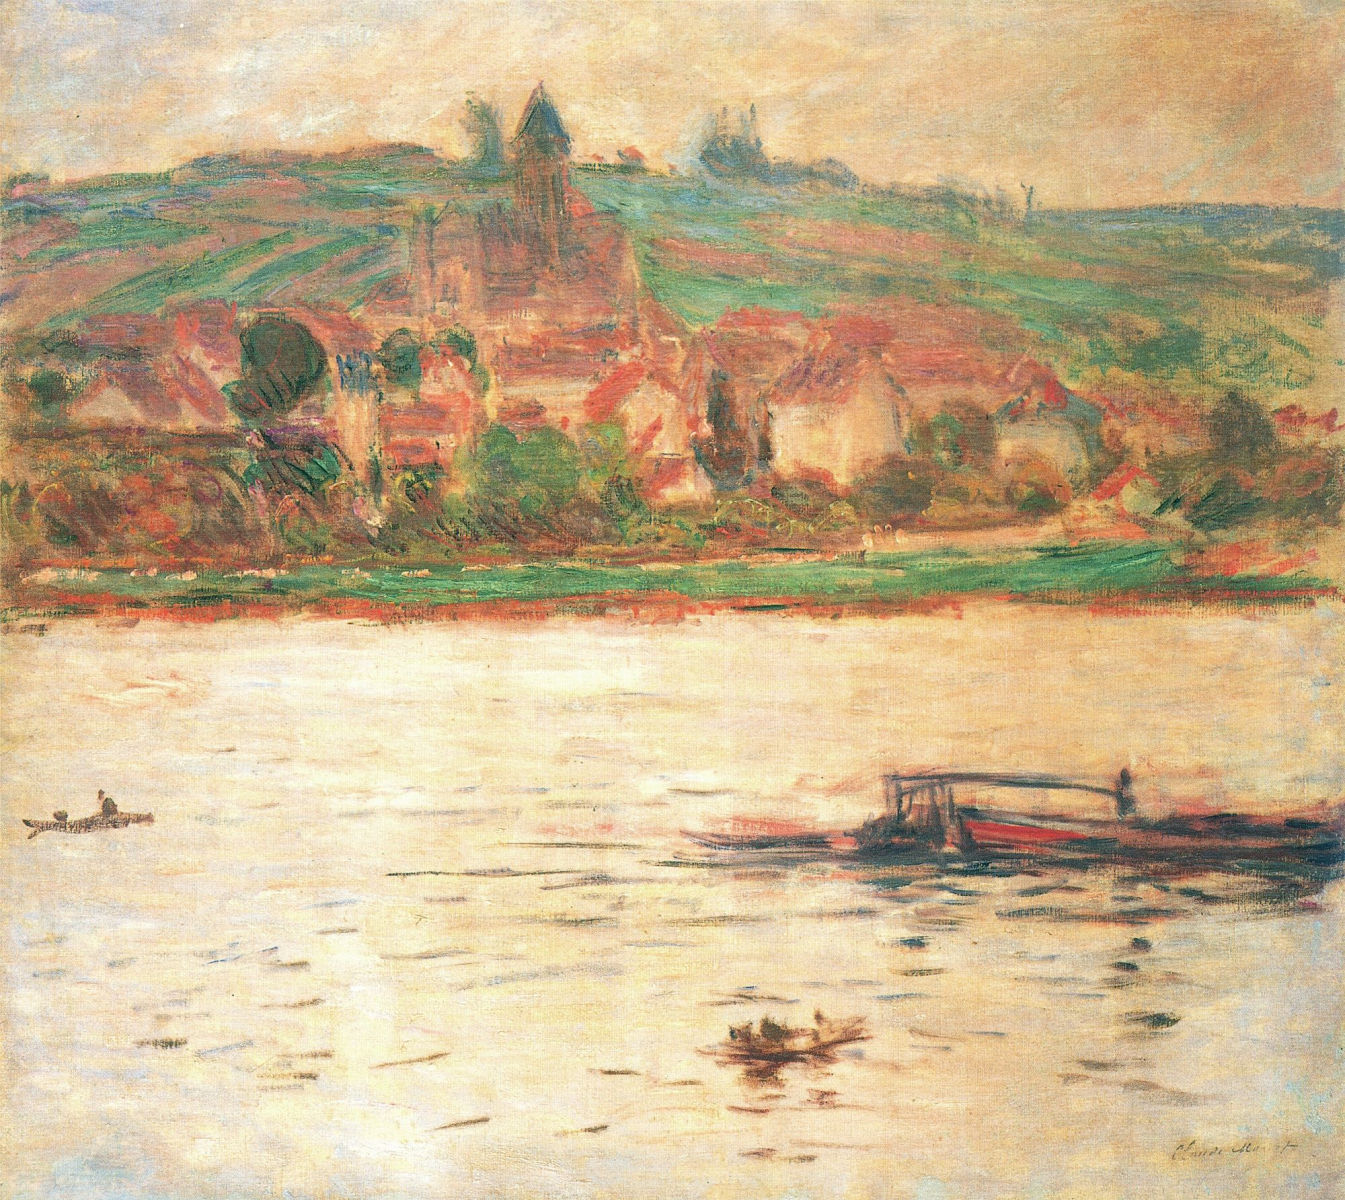 Vetheuil, Barge on the Seine 1902